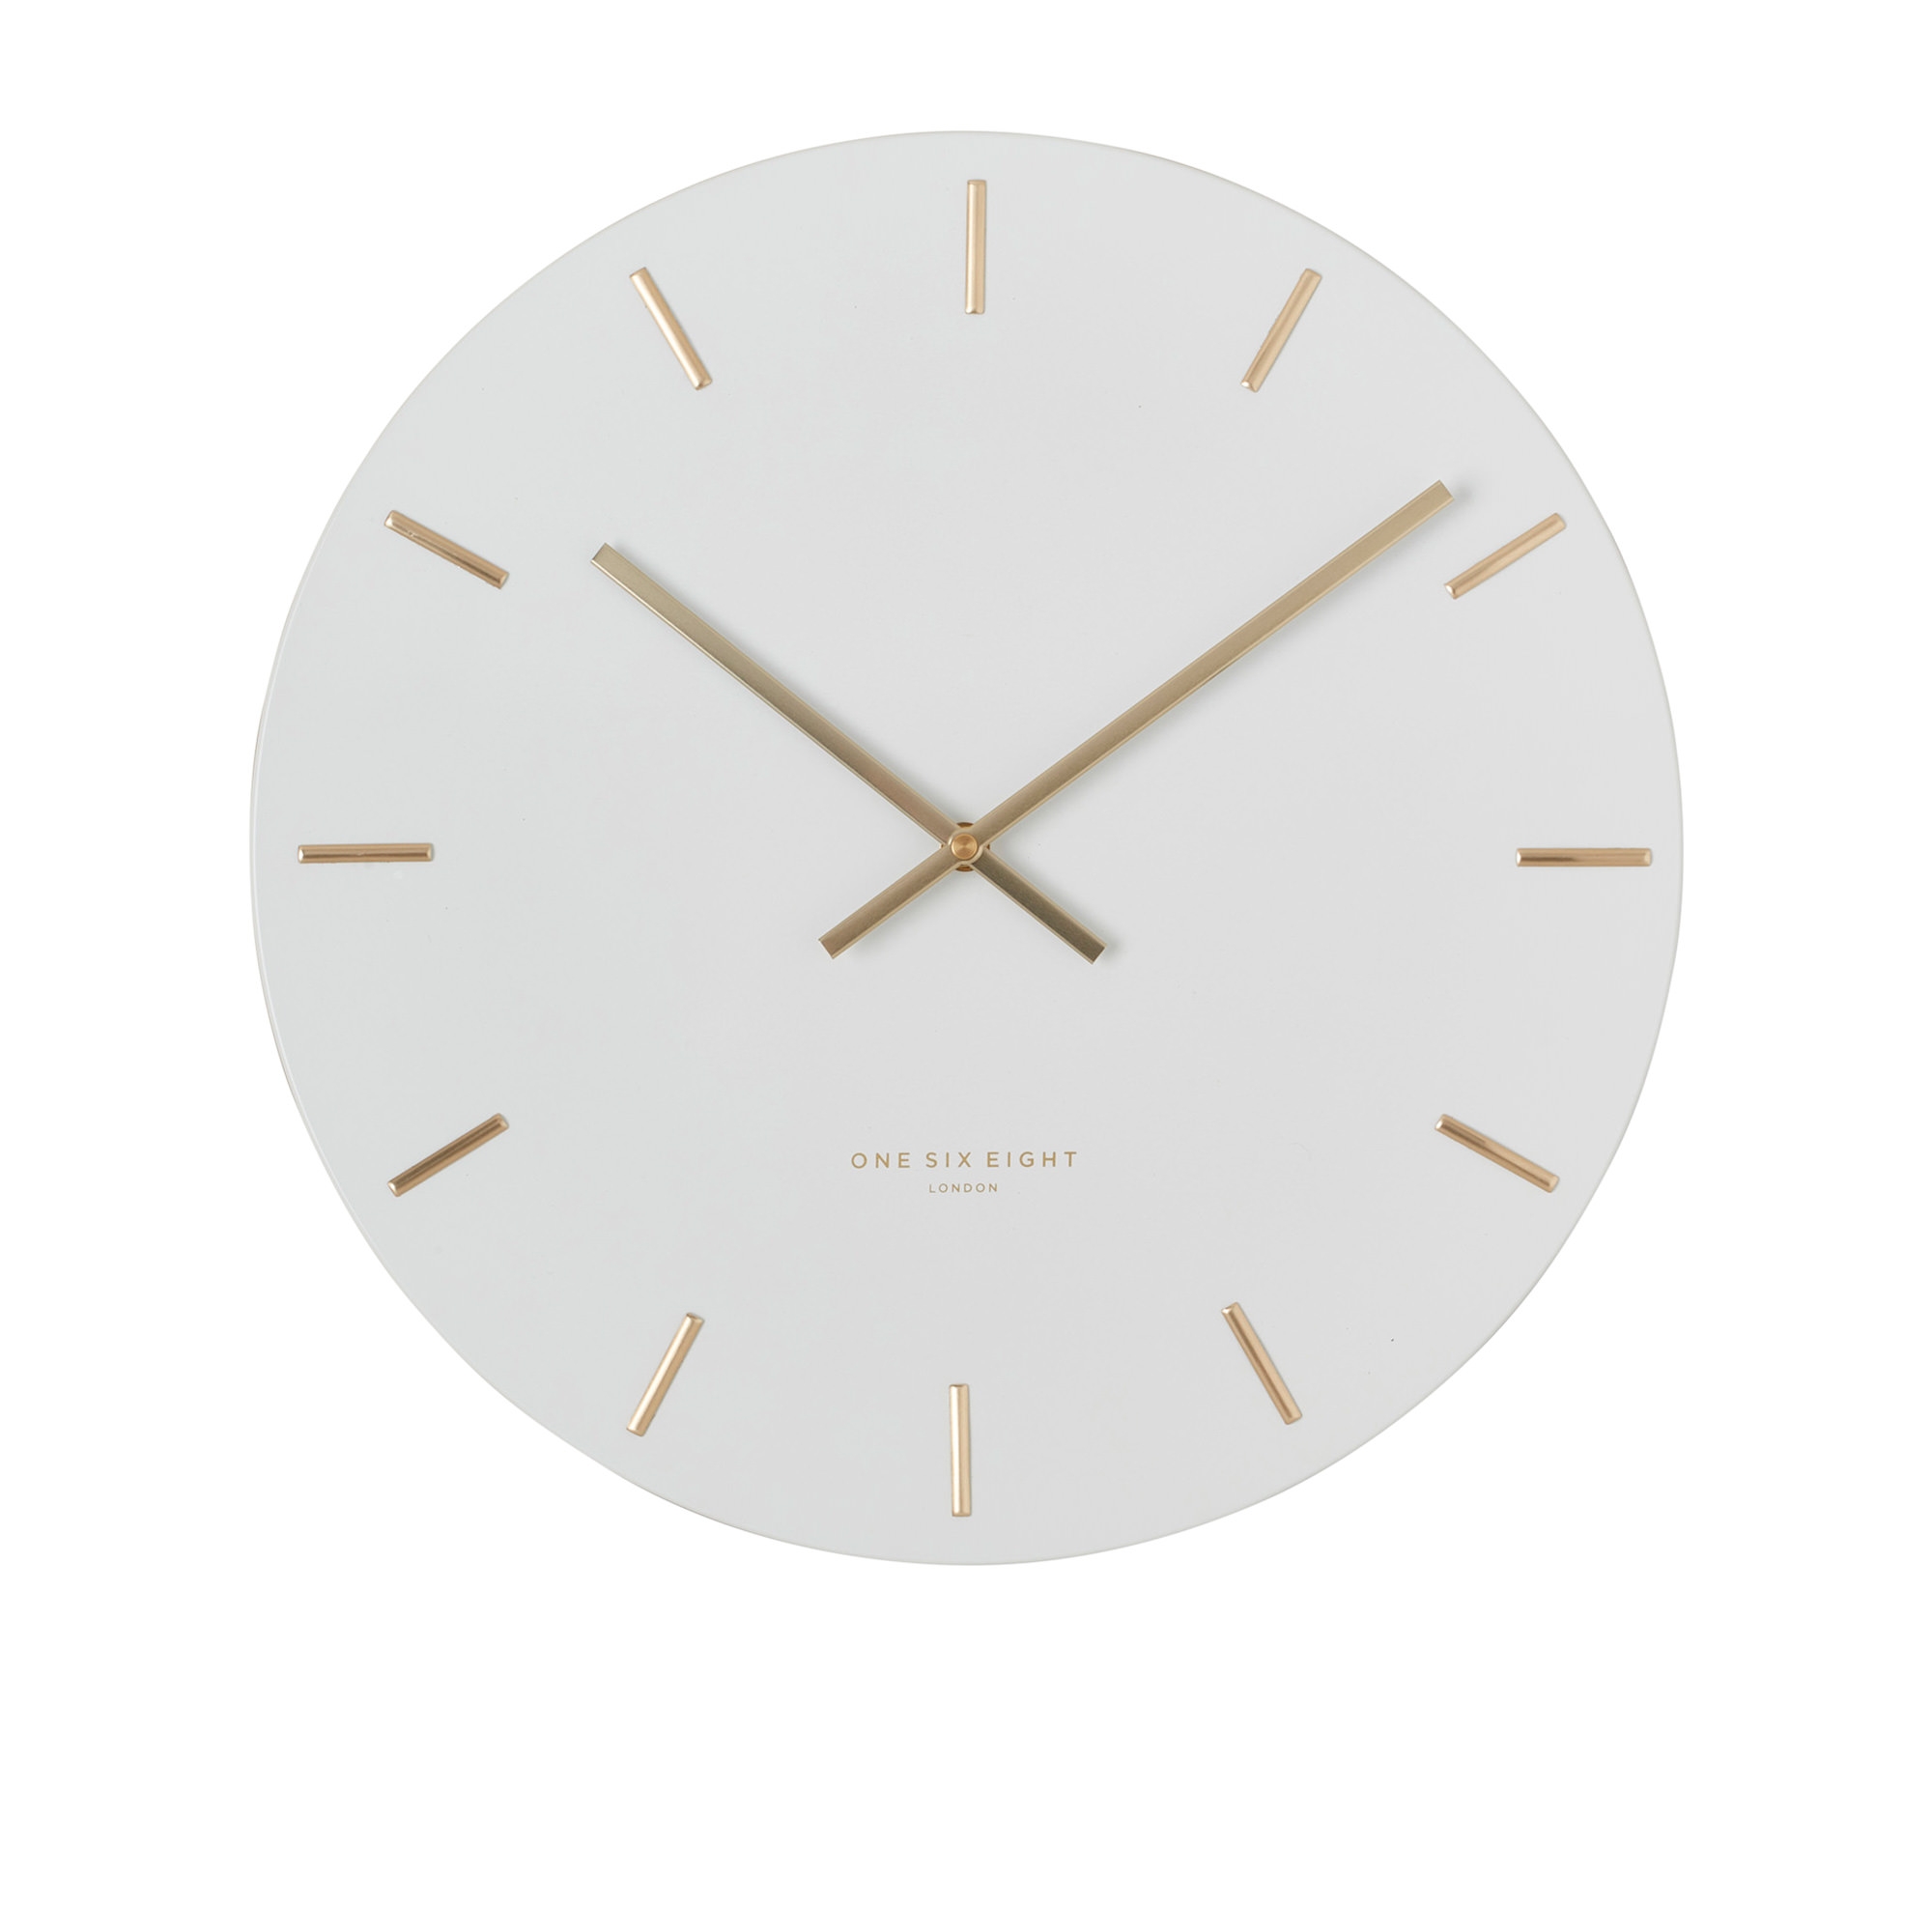 One Six Eight London Luca Silent Wall Clock 60cm White Image 1